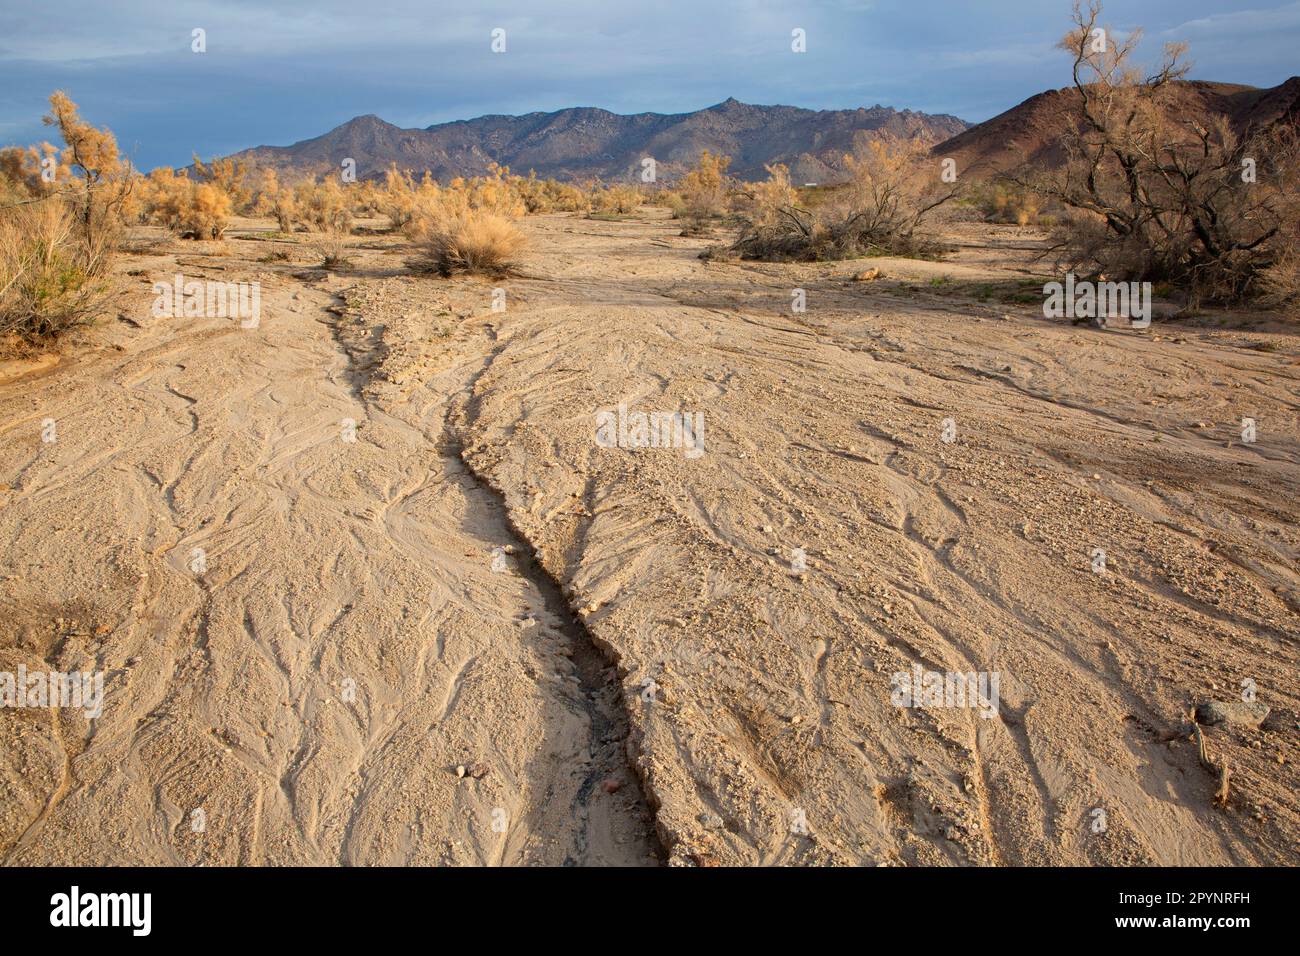 Wash in Marble Mountains, Mojave Trails National Monument, California Stock Photo